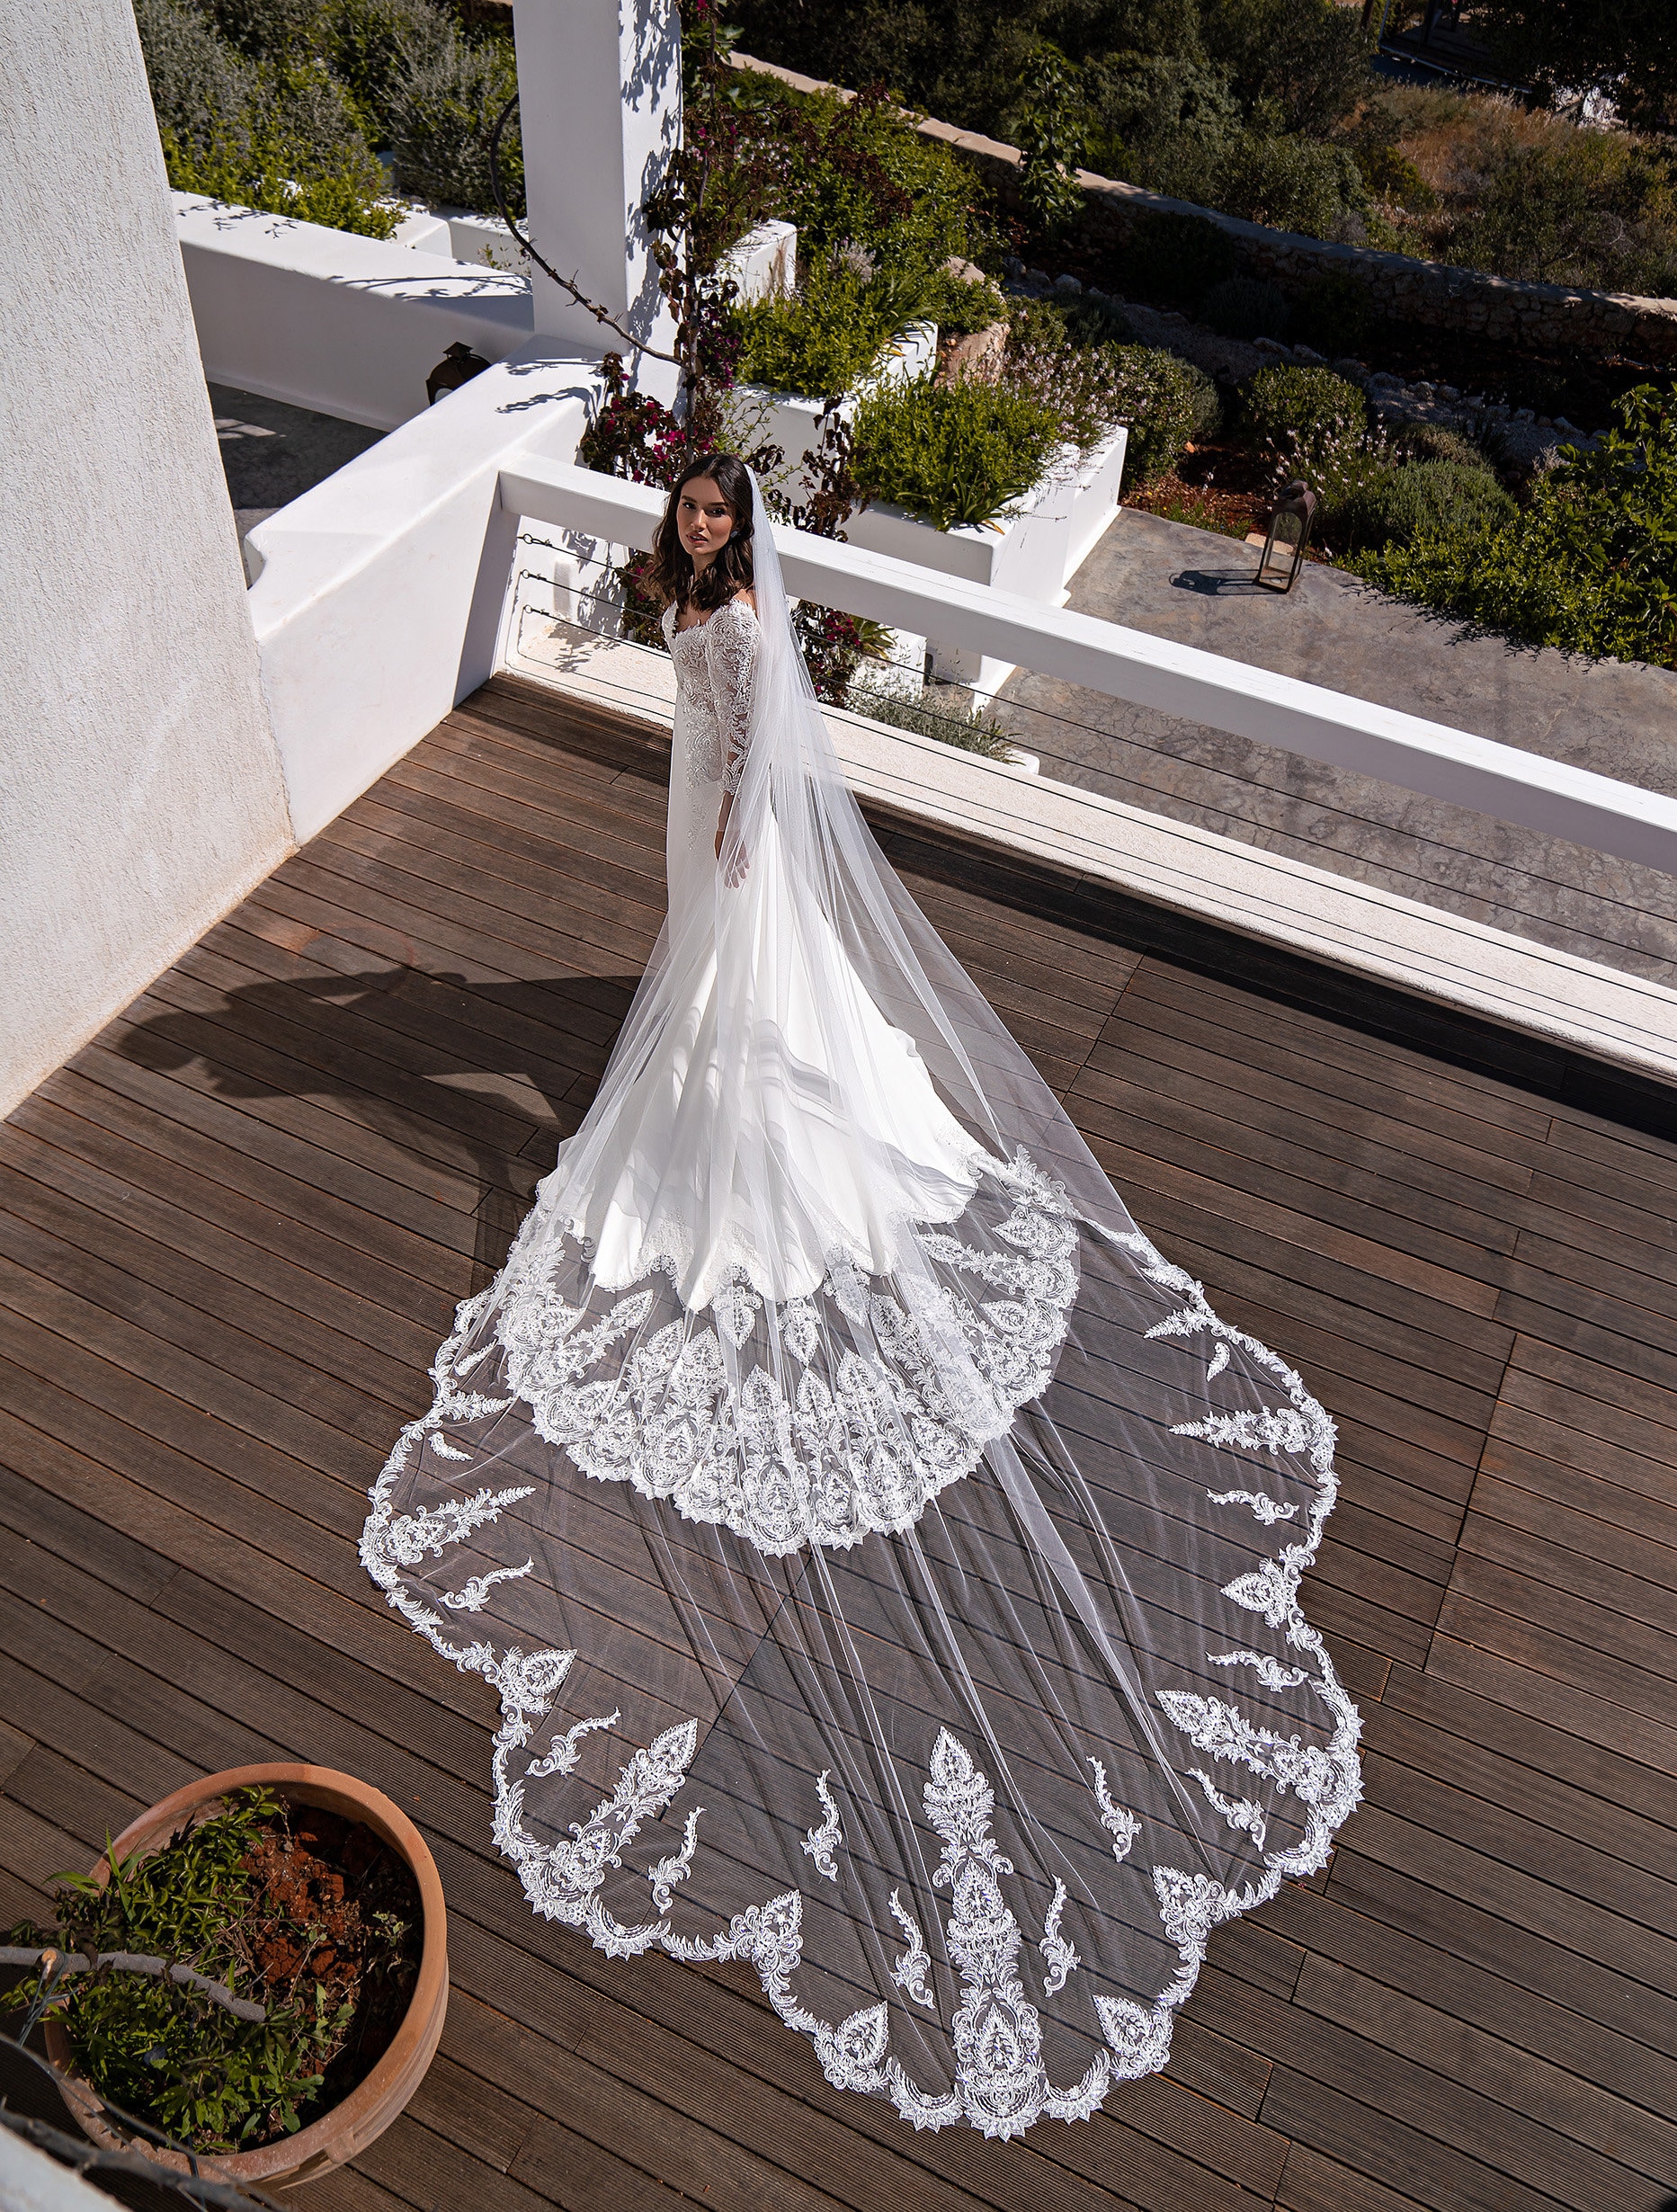 Lace Wedding Veil FN-058, 118 Inches Bridal Veil, Tulle Cathedral Length,  Veil With Comb, One Tier Veil, Bundle Veil 